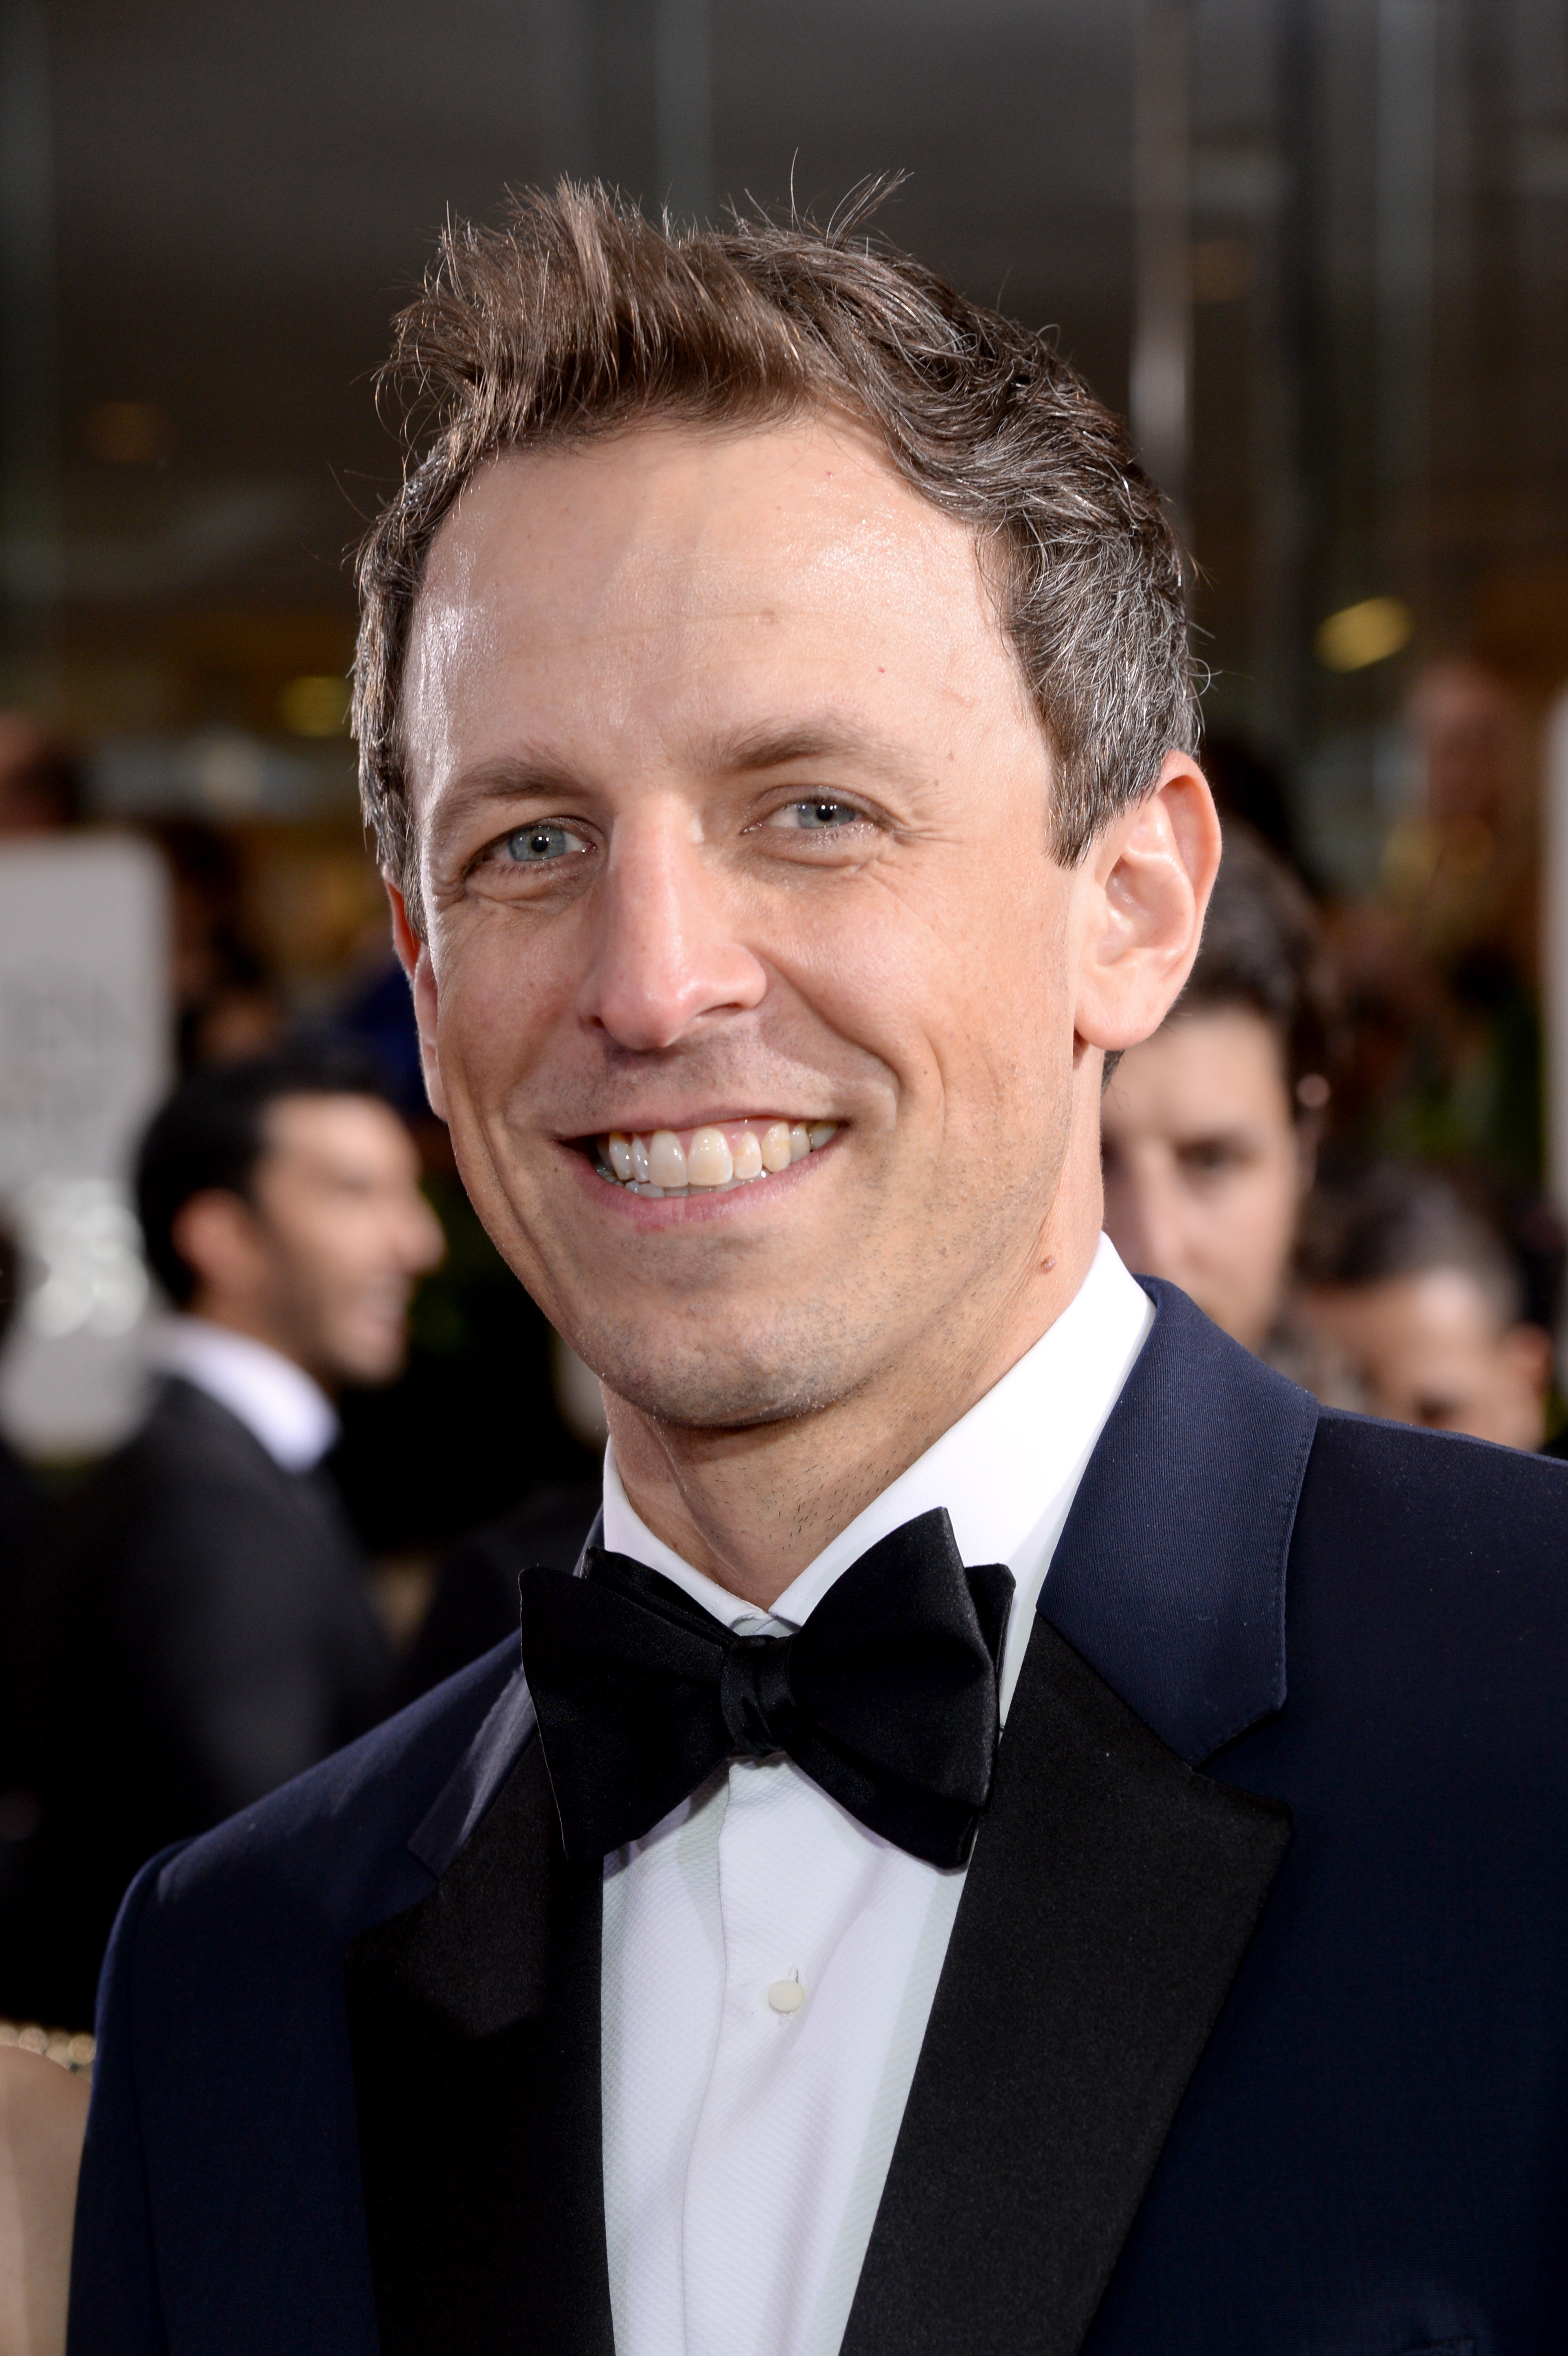 Comedian Seth Meyers attends the 72nd Annual Golden Globe Awards at The Beverly Hilton Hotel on Jan. 11 in Beverly Hills, California. (Michael Kovac—Getty Images)